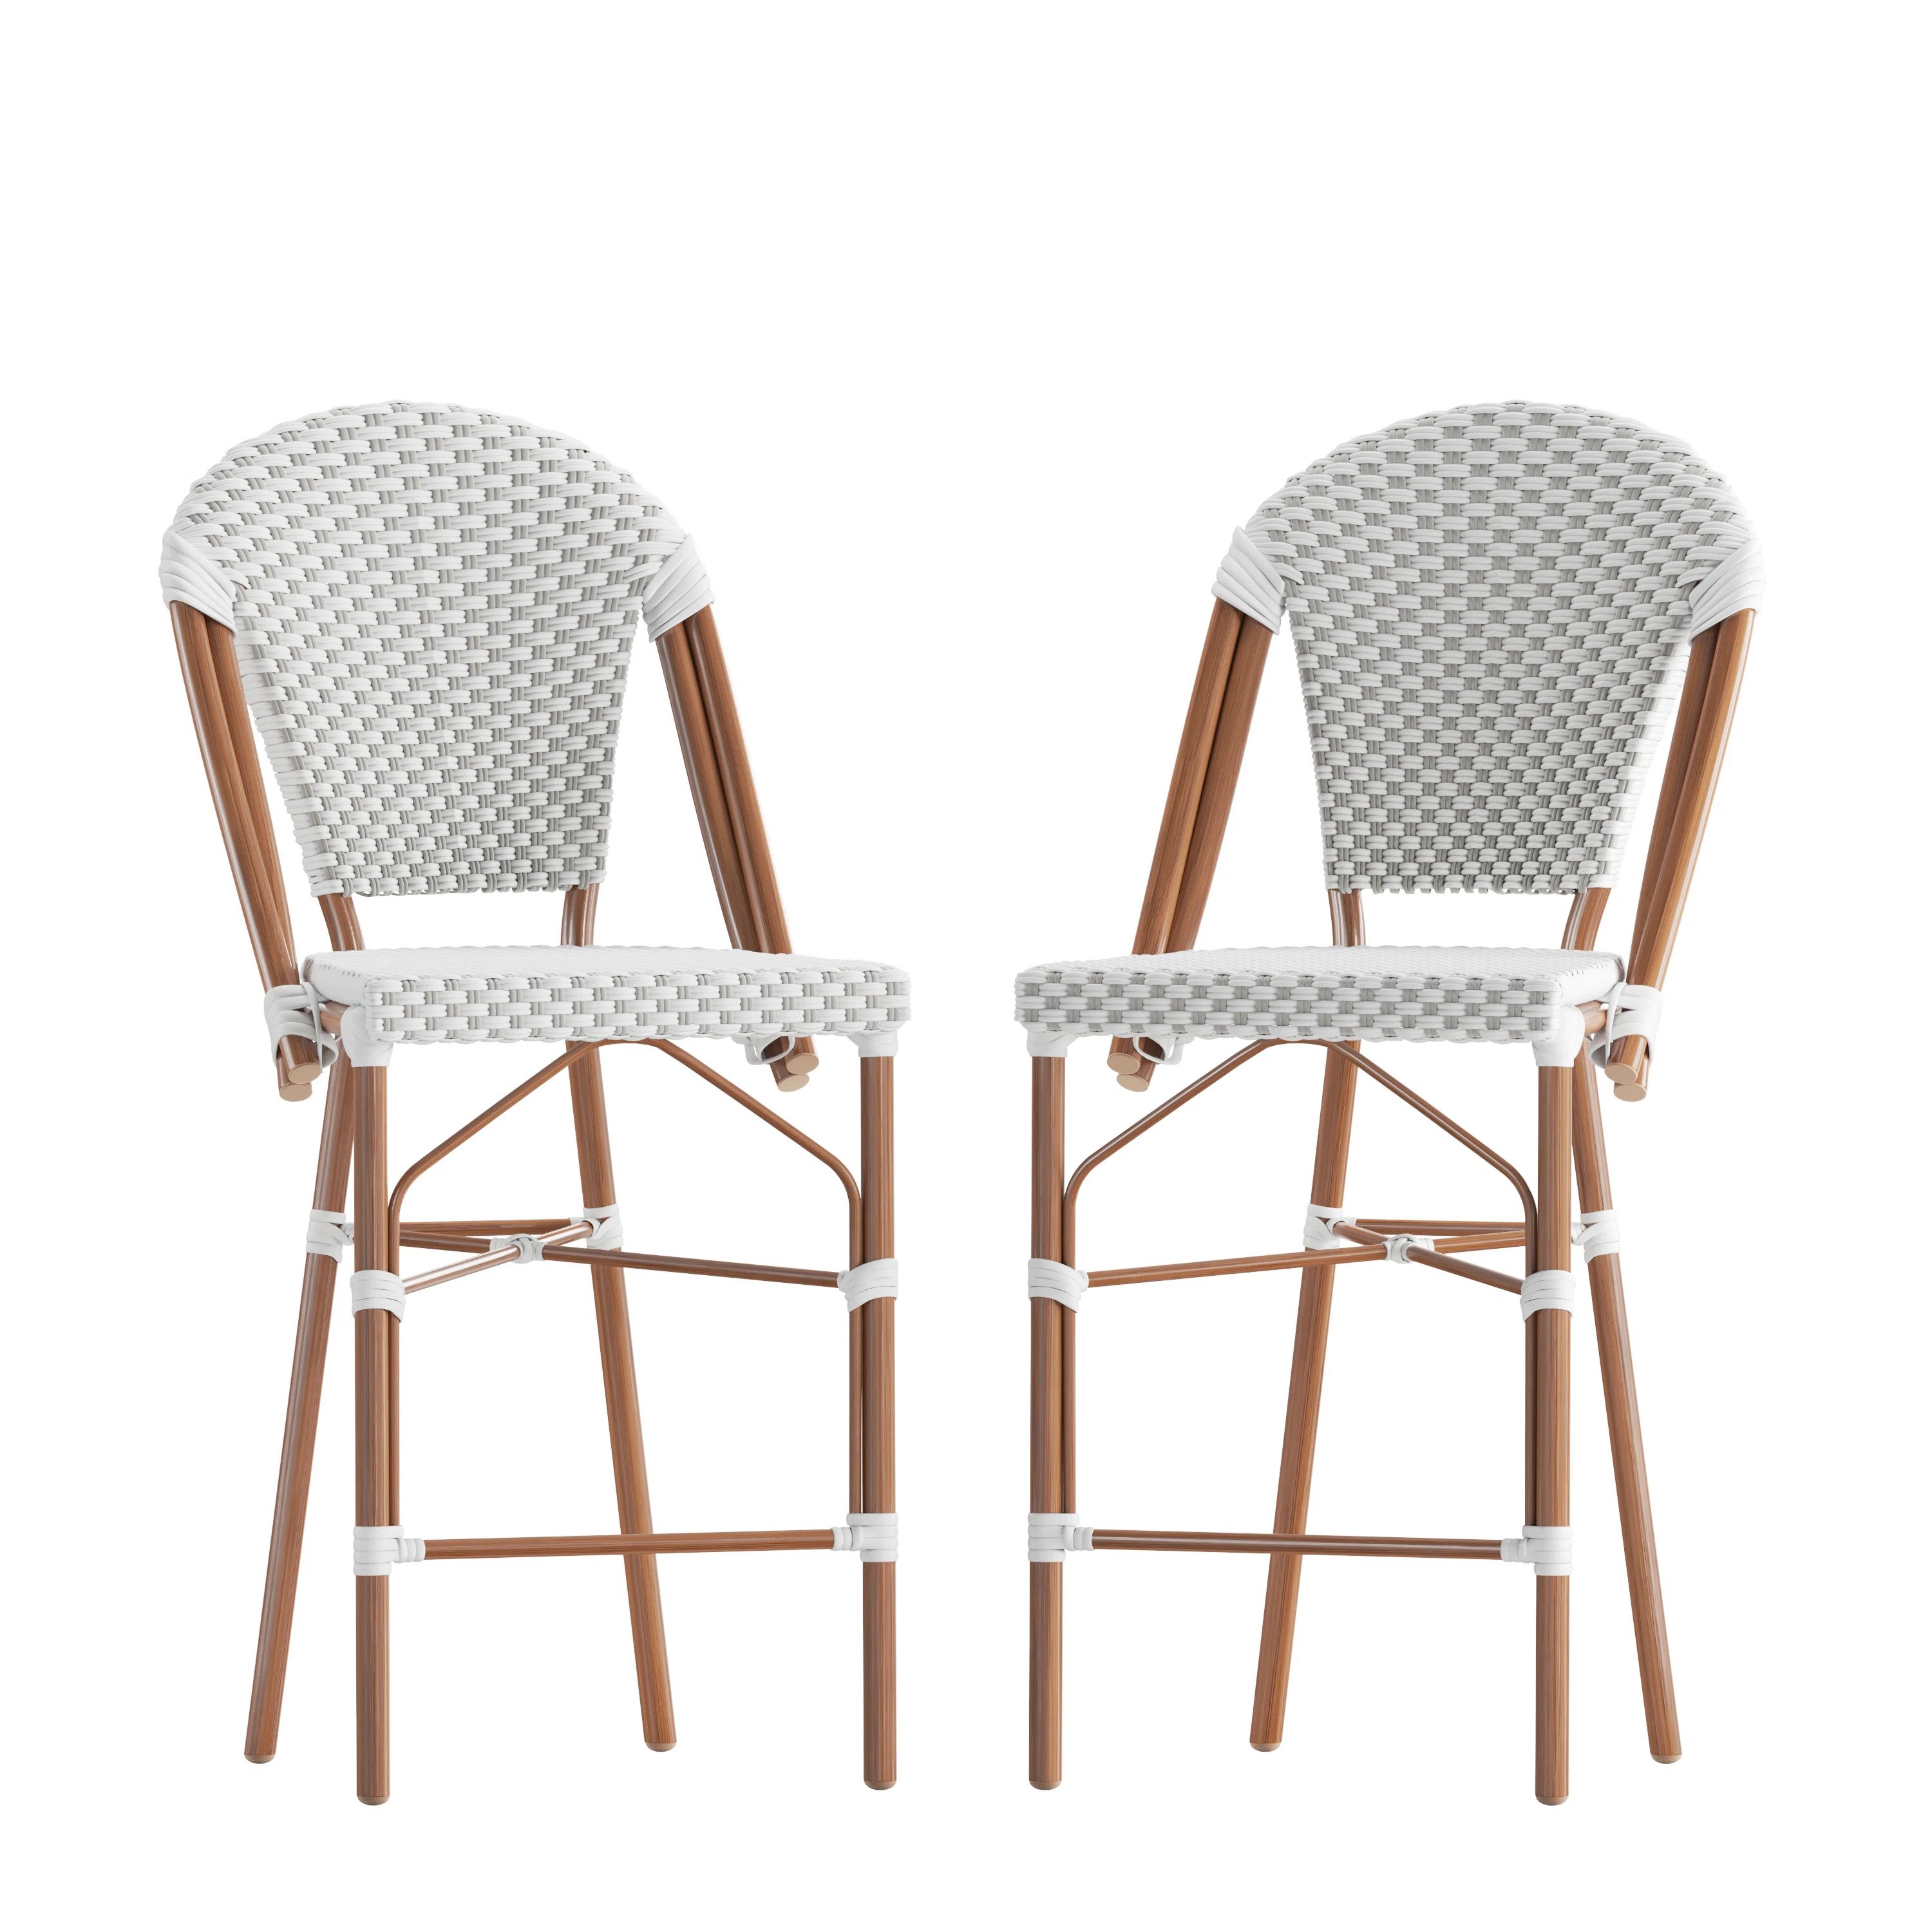 Indoor/Outdoor All-Weather Commercial Paris Chairs with Bamboo Print Frame (Set of 2) | Wayfair Professional